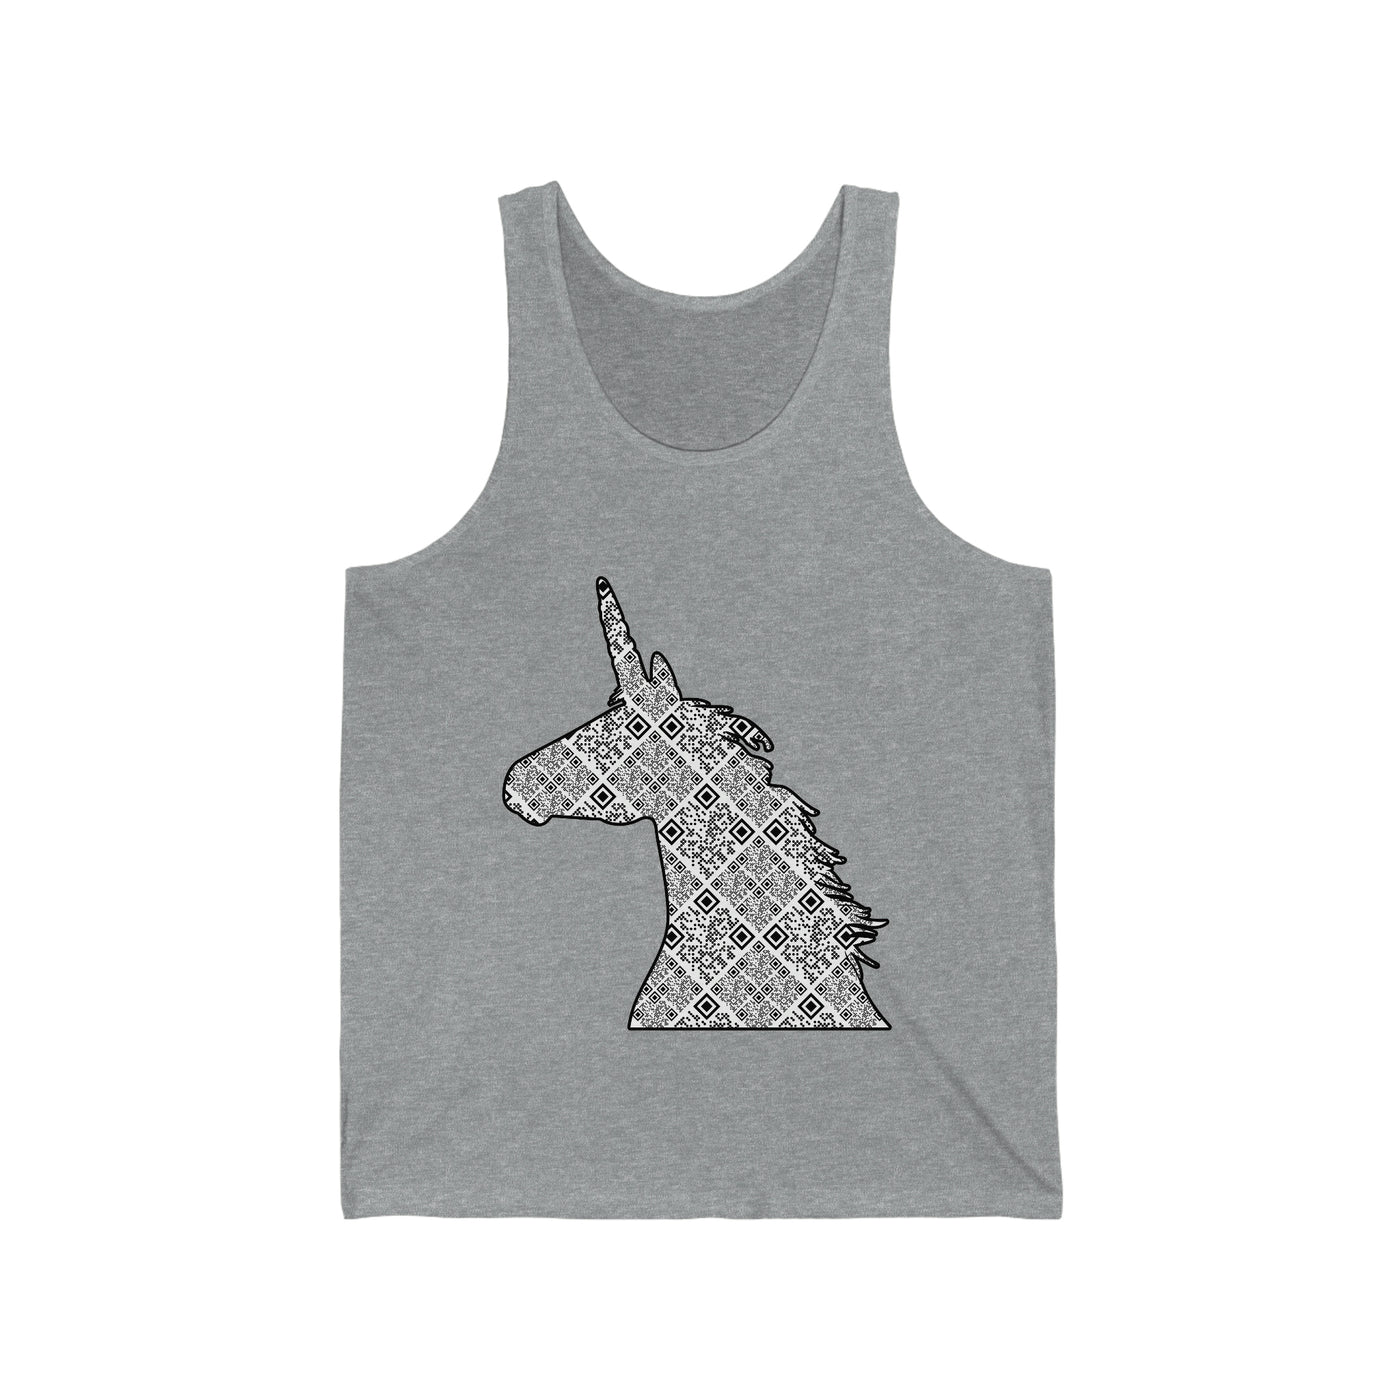 XR Reality Collection: Mystical Unicorn (Unisex) Adult Tank Top